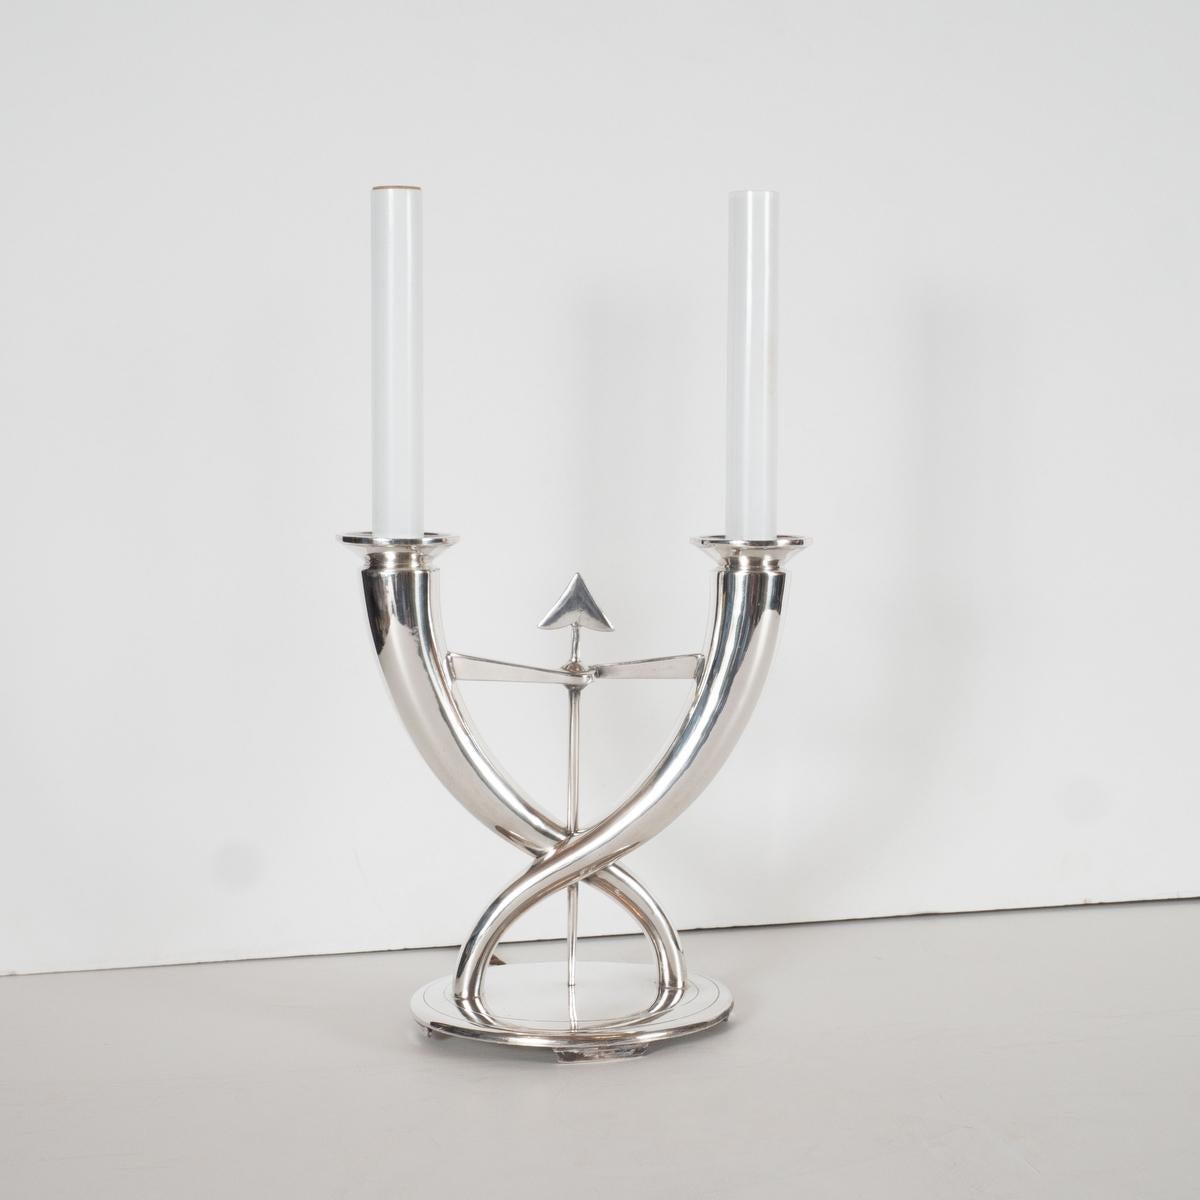 Silver plate arrow and horn candelabra style table lamp by Gio Ponti for Gallia / Christofle. Signed.